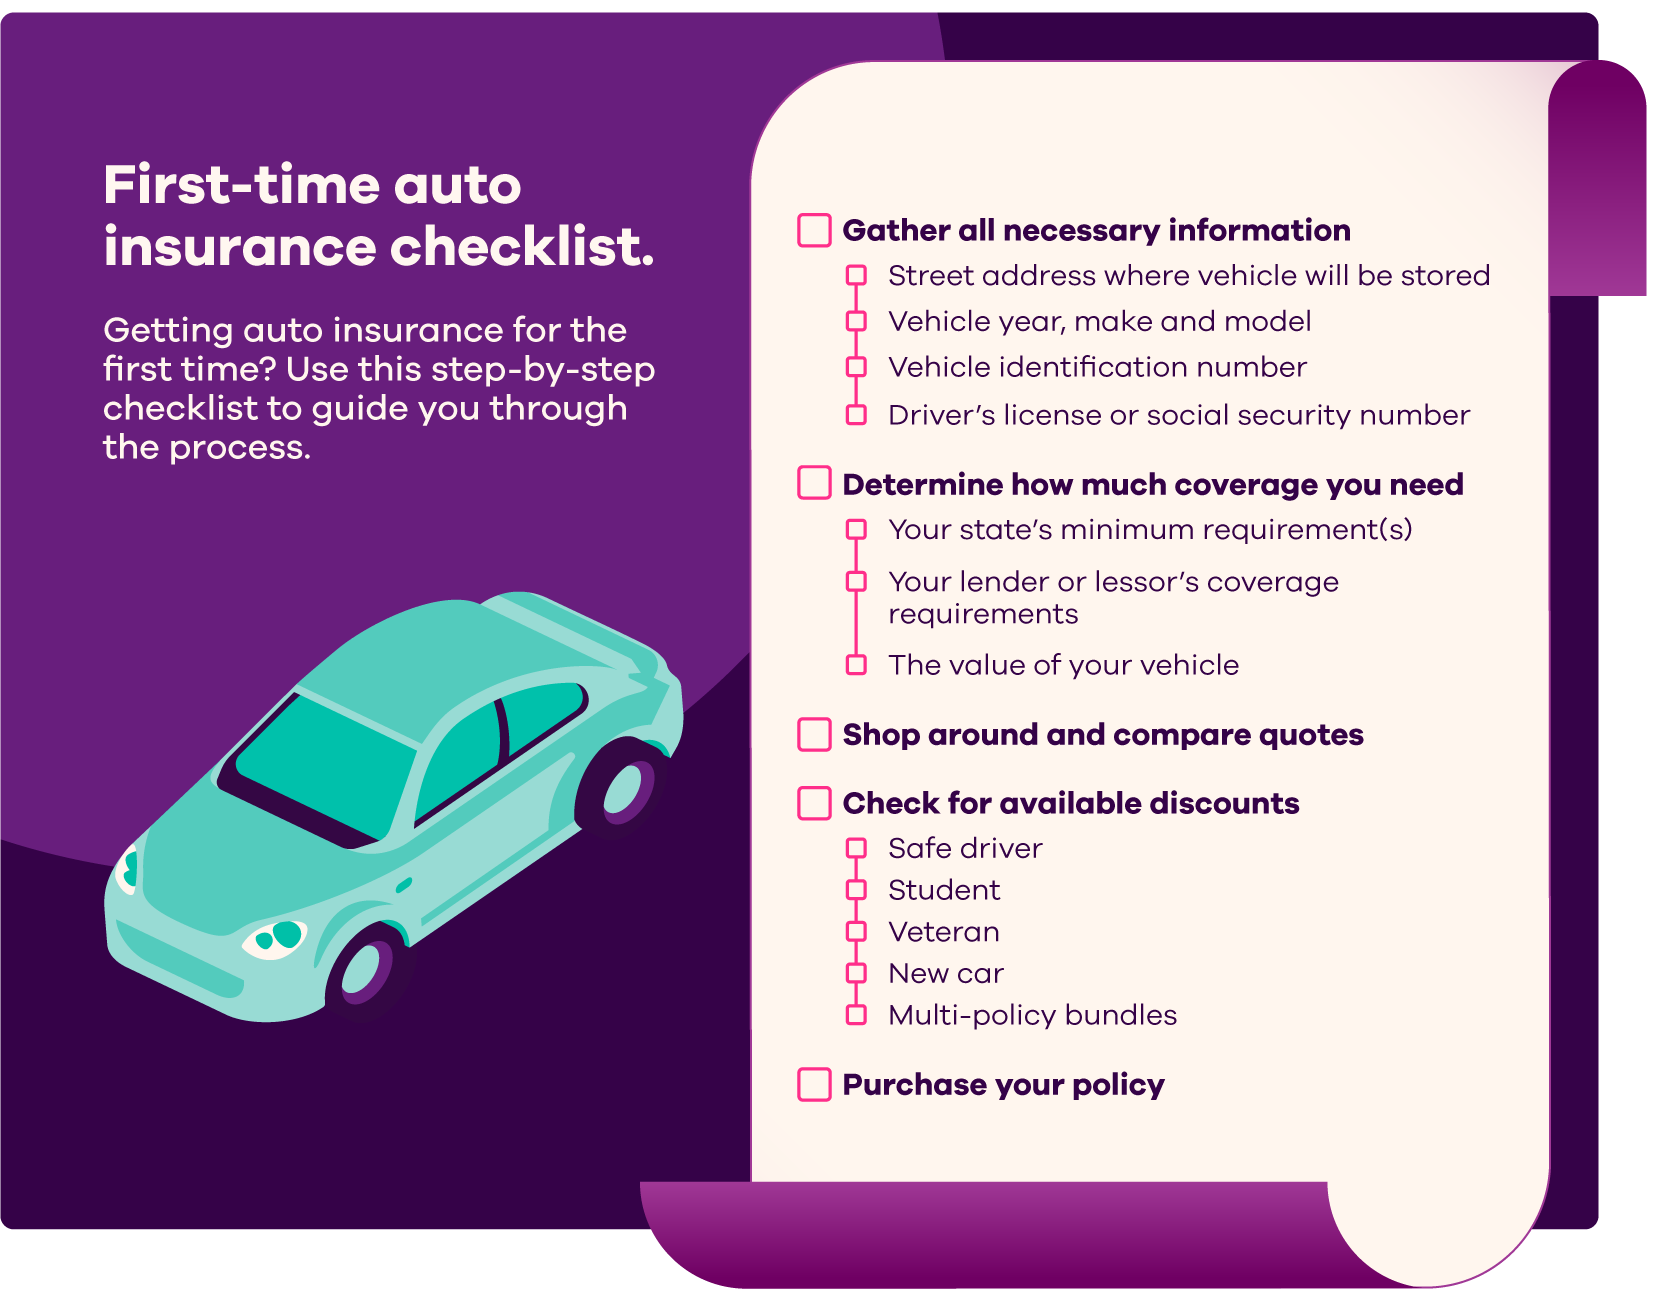 First-time auto insurance checklist. Getting auto insurance for the first time? Use this step-by-step checklist to guide you through the process. First, gather all necessary information, such as: street address where vehicle will be stored, vehicle year, make and model, vehicle identification number, and driver’s license or social security number. Next, determine how much coverage you need based on your state’s requirements, your lender or lessor’s coverage requirements, and the value of your vehicle. Next, shop around and compare quotes. Next, check for available discounts, such as safe driver, student, veteran, and new car discounts or multi-policy bundles. Lastly, purchase your policy.